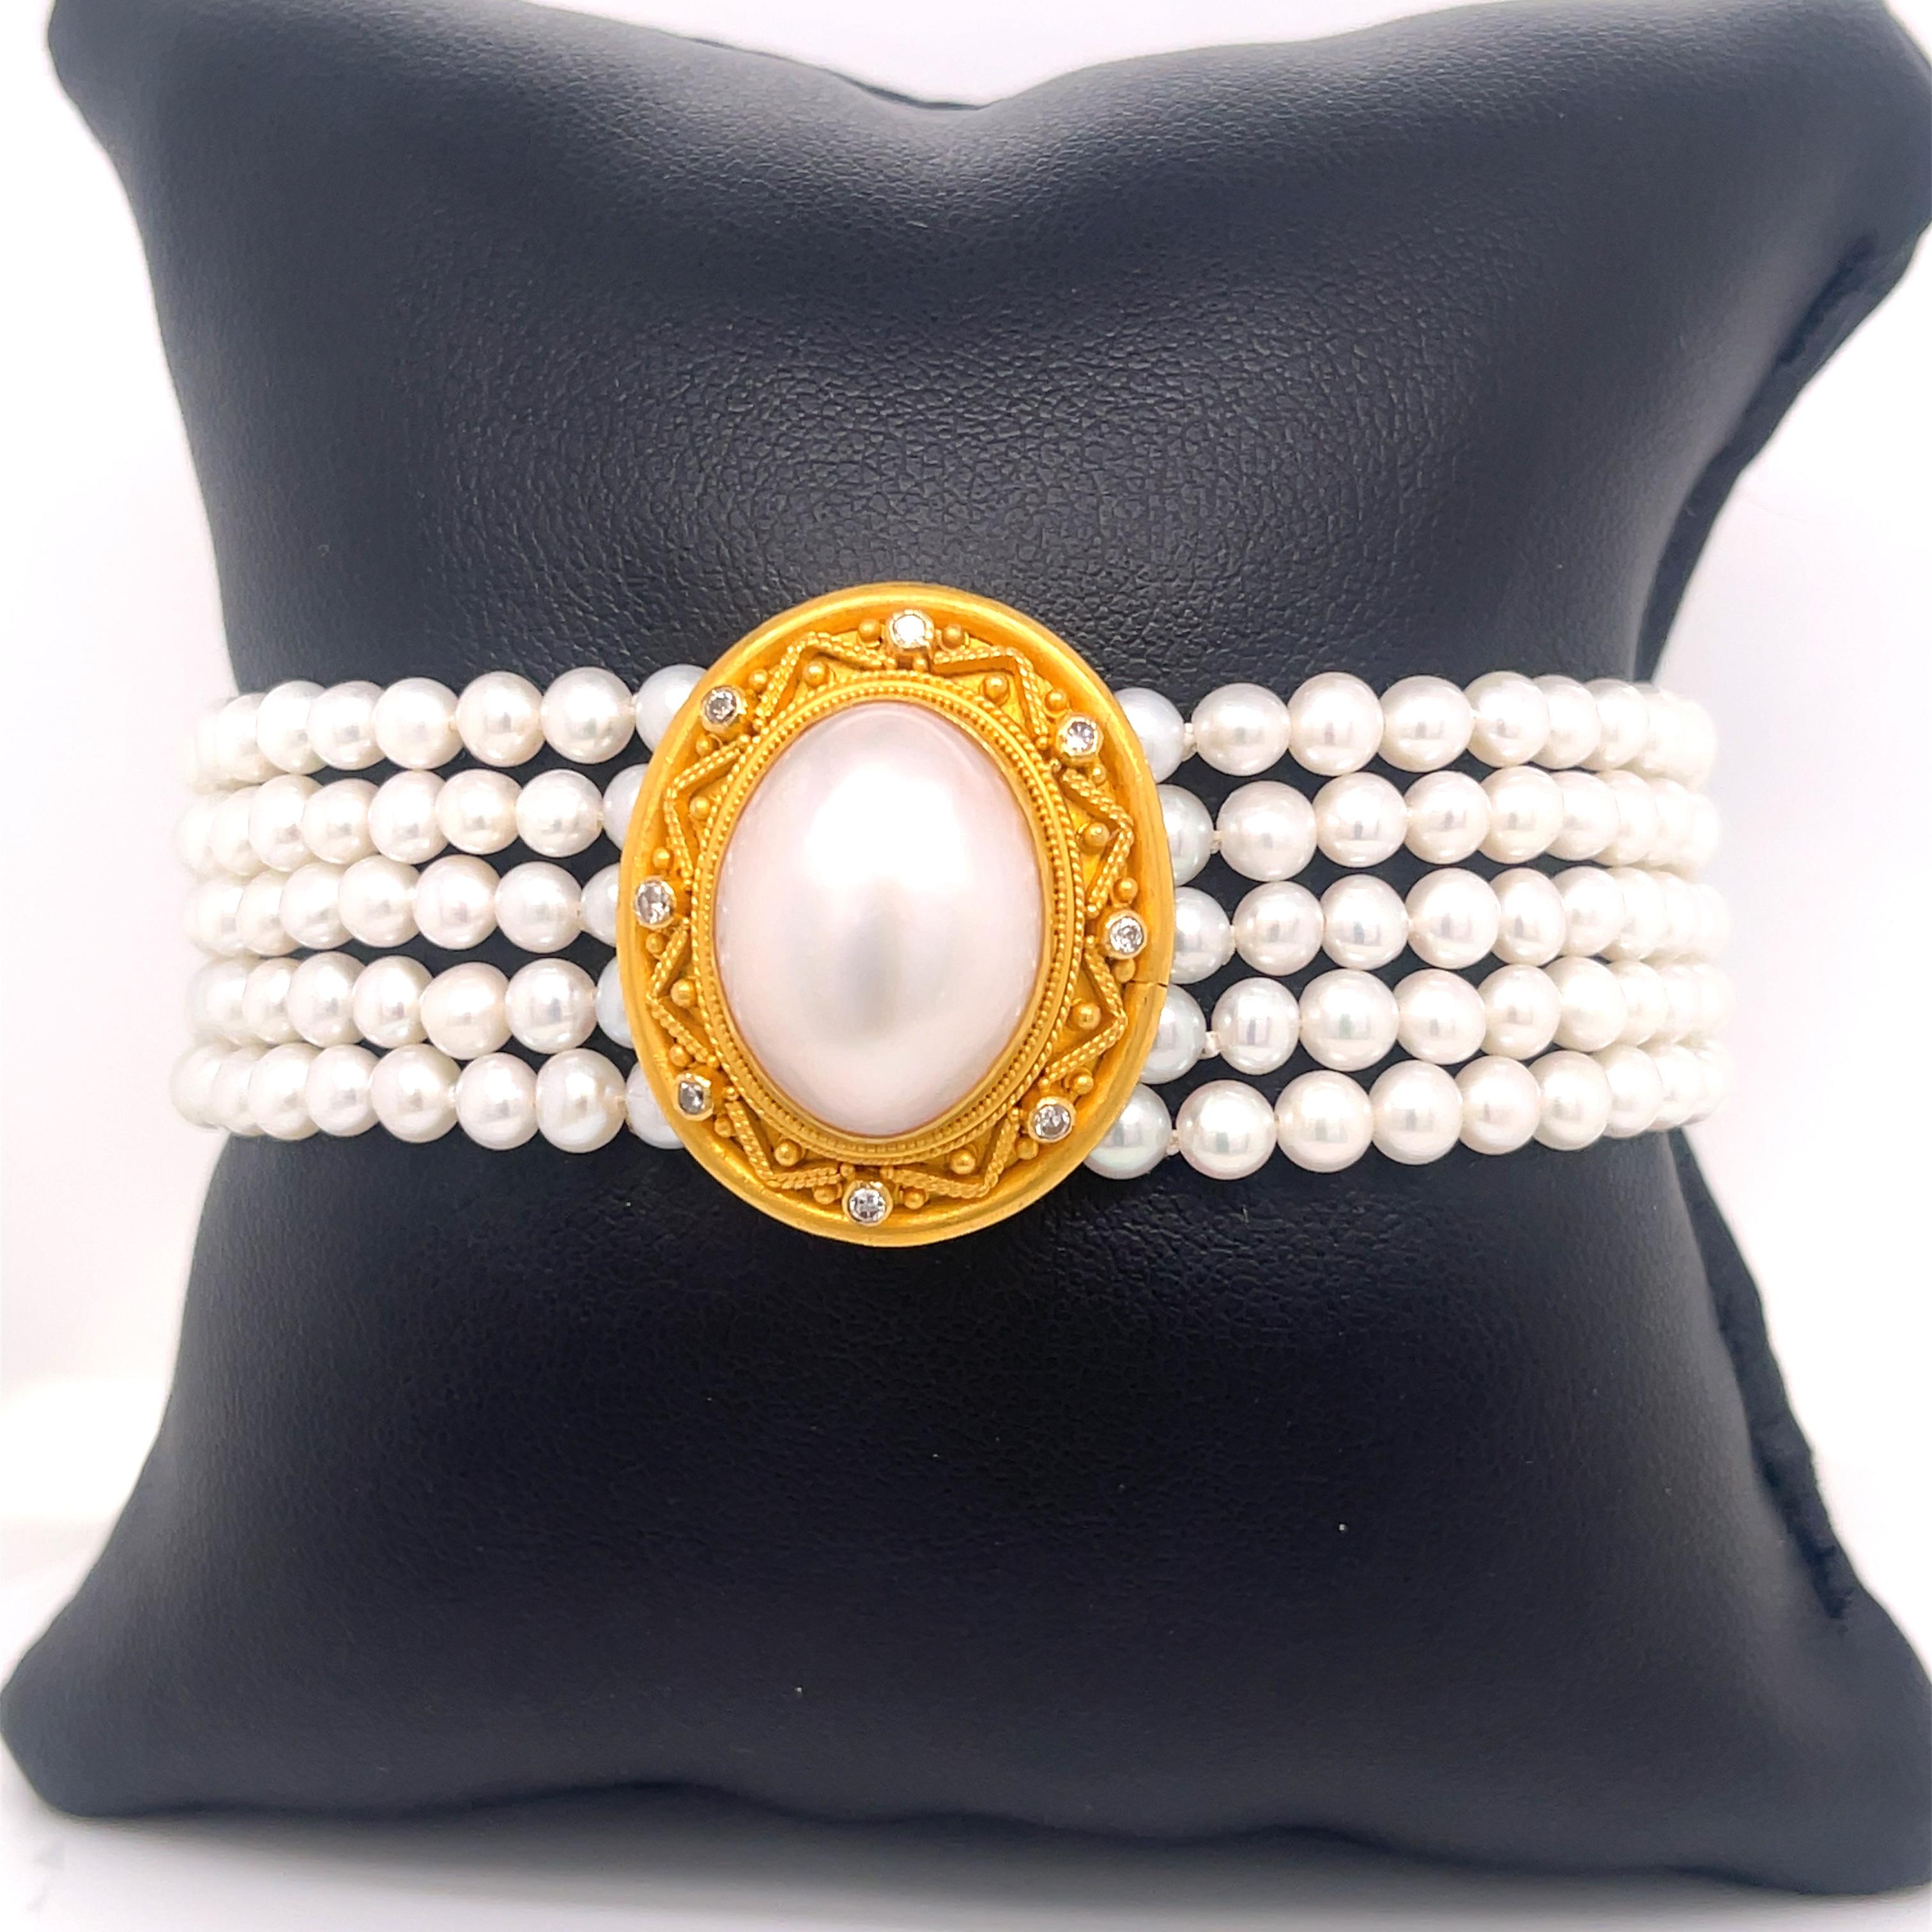 Carolyn Tyler pearl and diamond bracelet in 22K gold. The bracelet features five strands of pearls on each side, with an oval mabe pearl in the center framed by eight diamonds. Stamped 22k C TYLER INDONESIA 2909. 